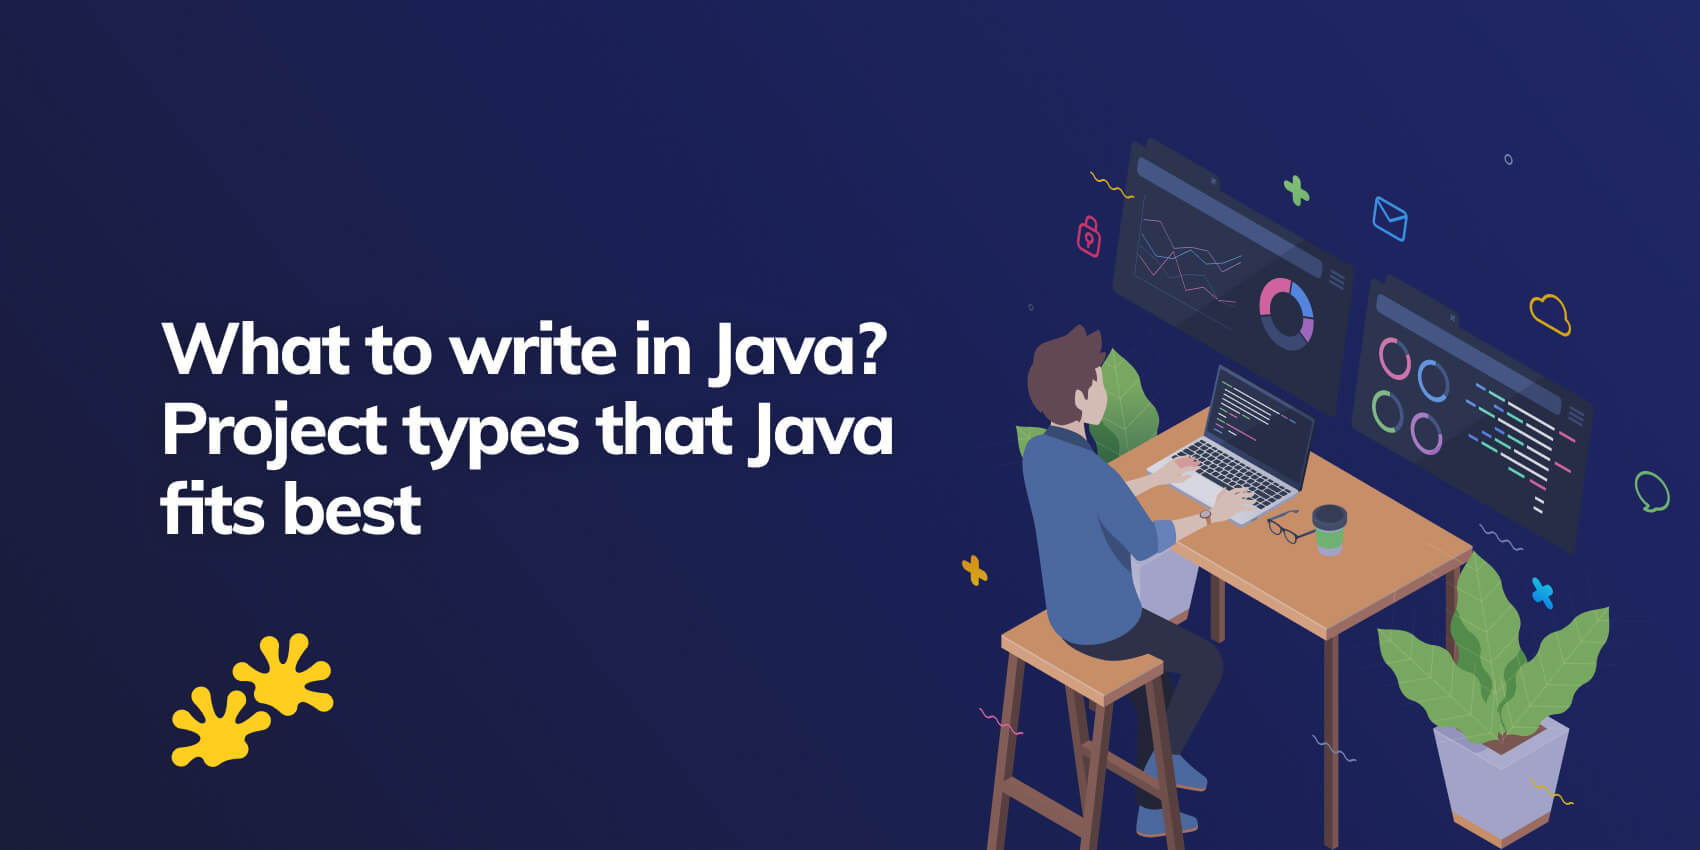 Project types for Java